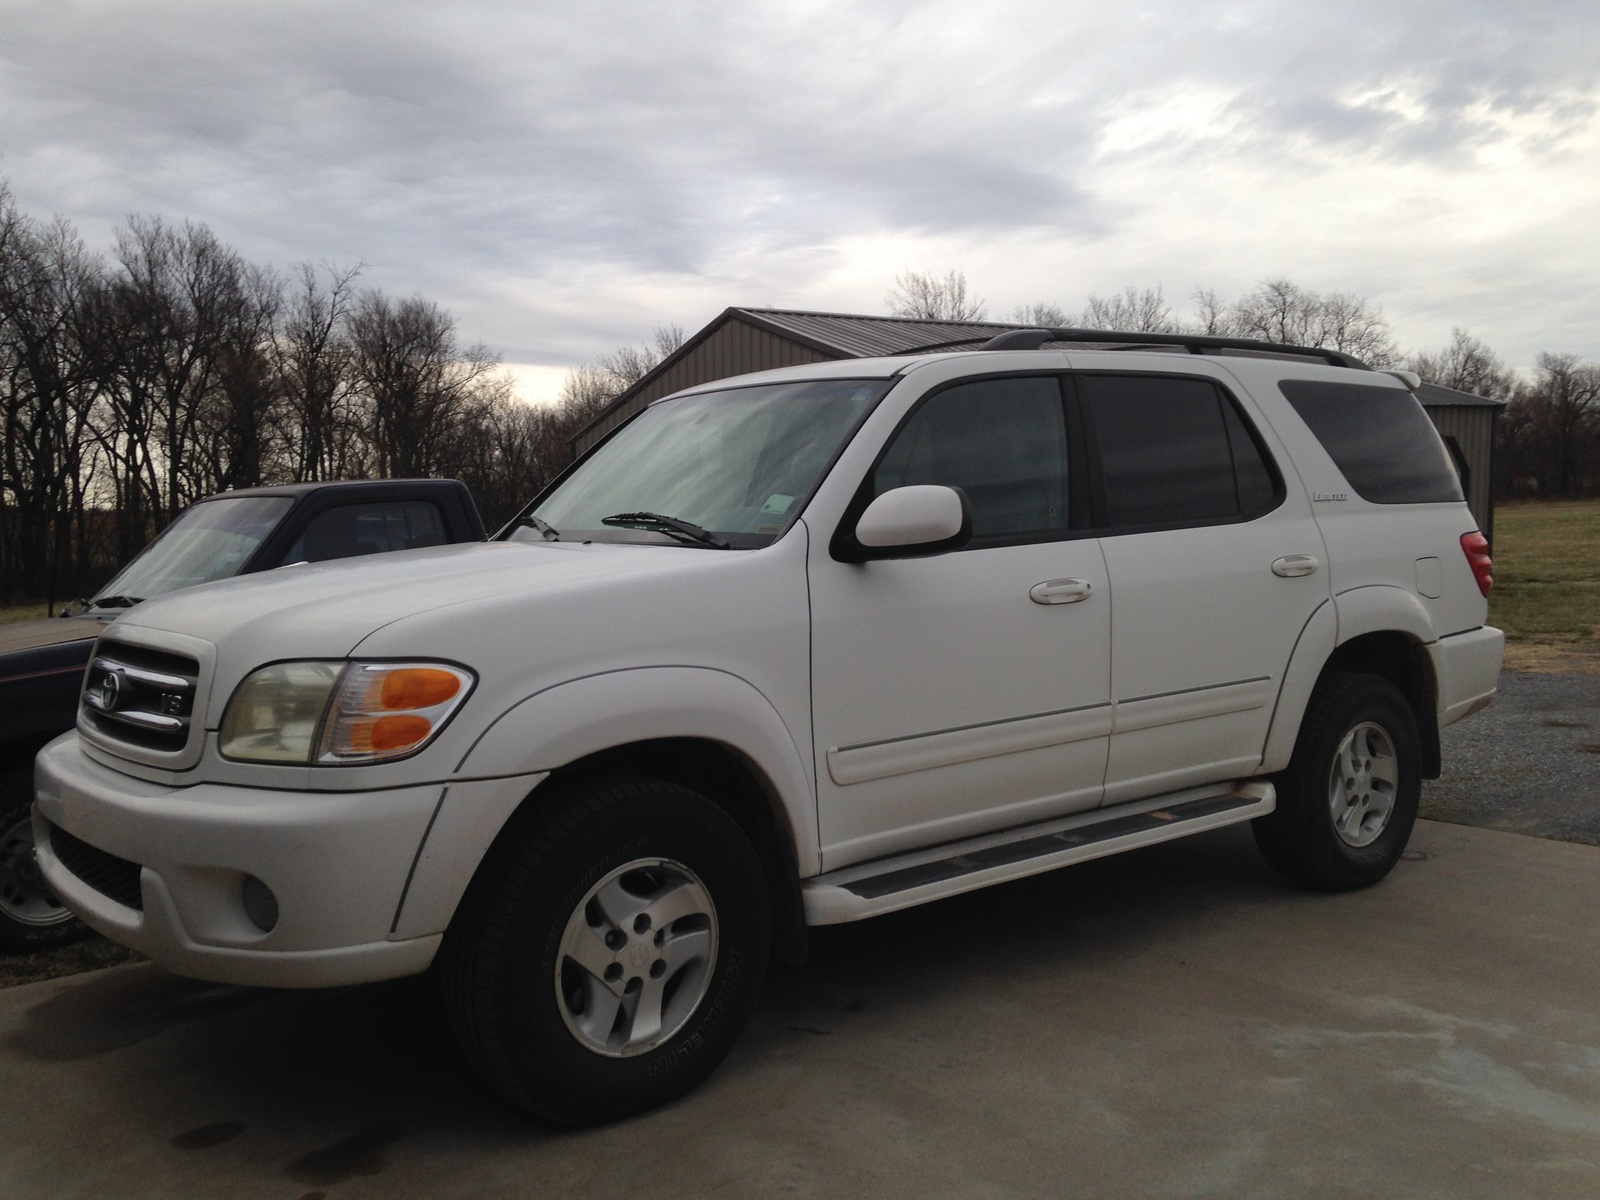 2001 toyota sequoia limited mpg #7